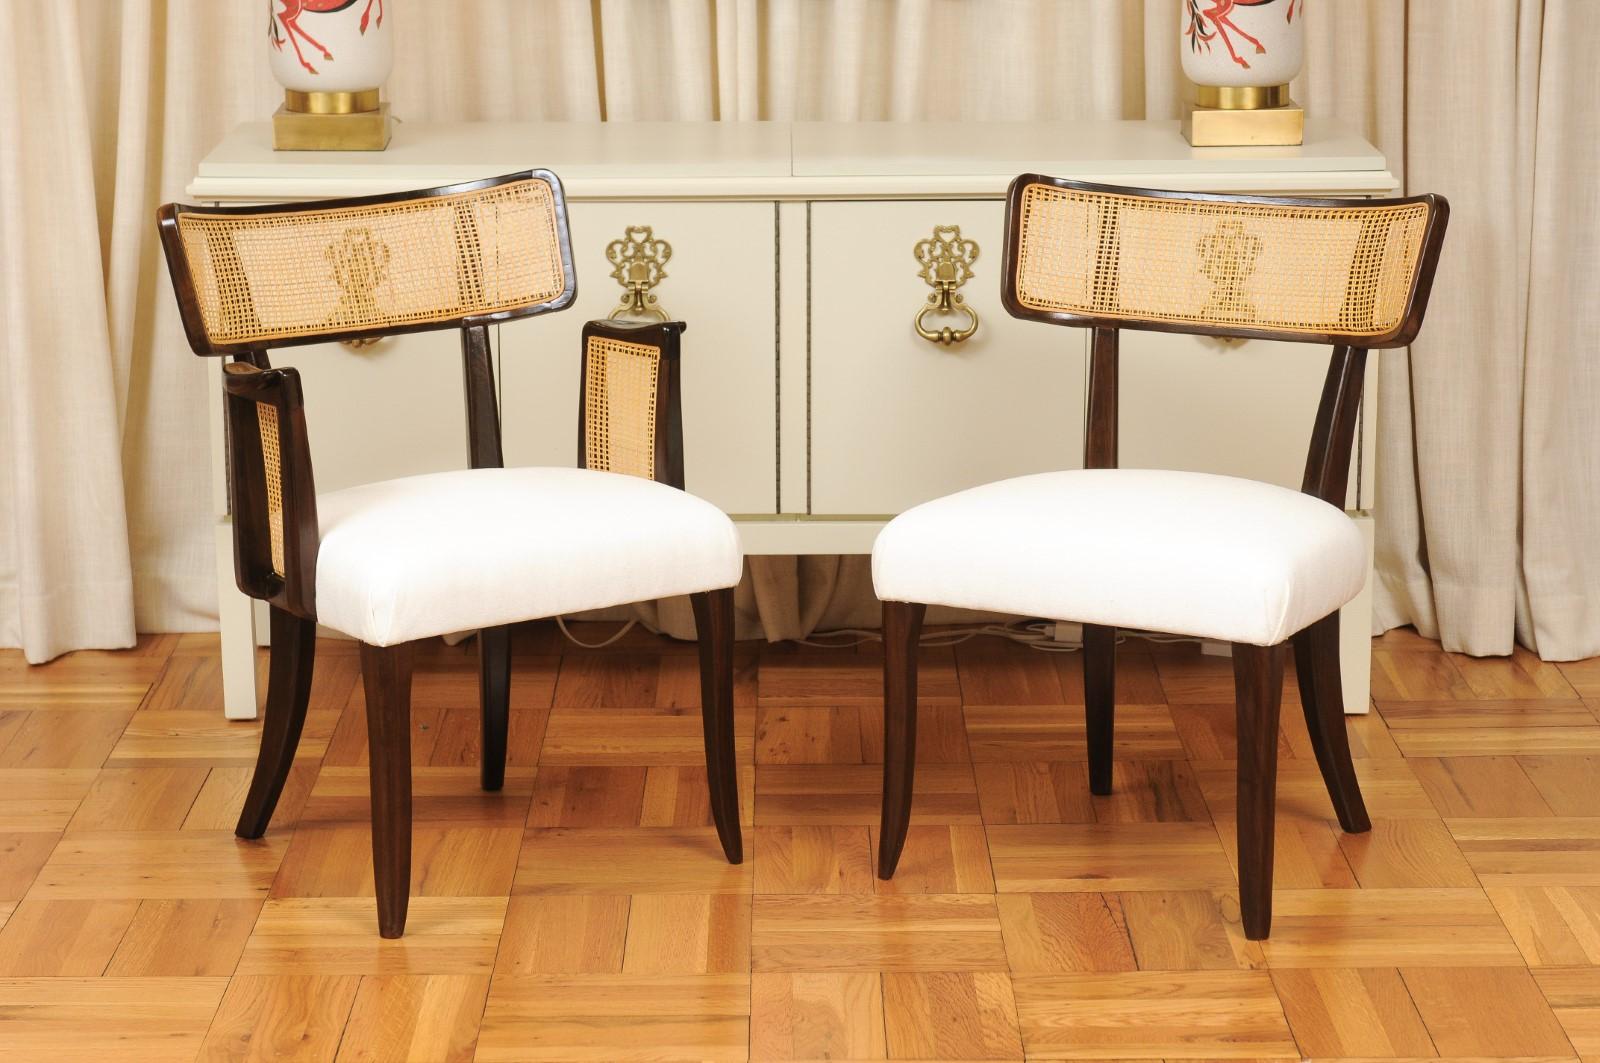 Remarkable Set of 14 Klismos Cane Dining Chairs by Edward Wormley, circa 1948 For Sale 12